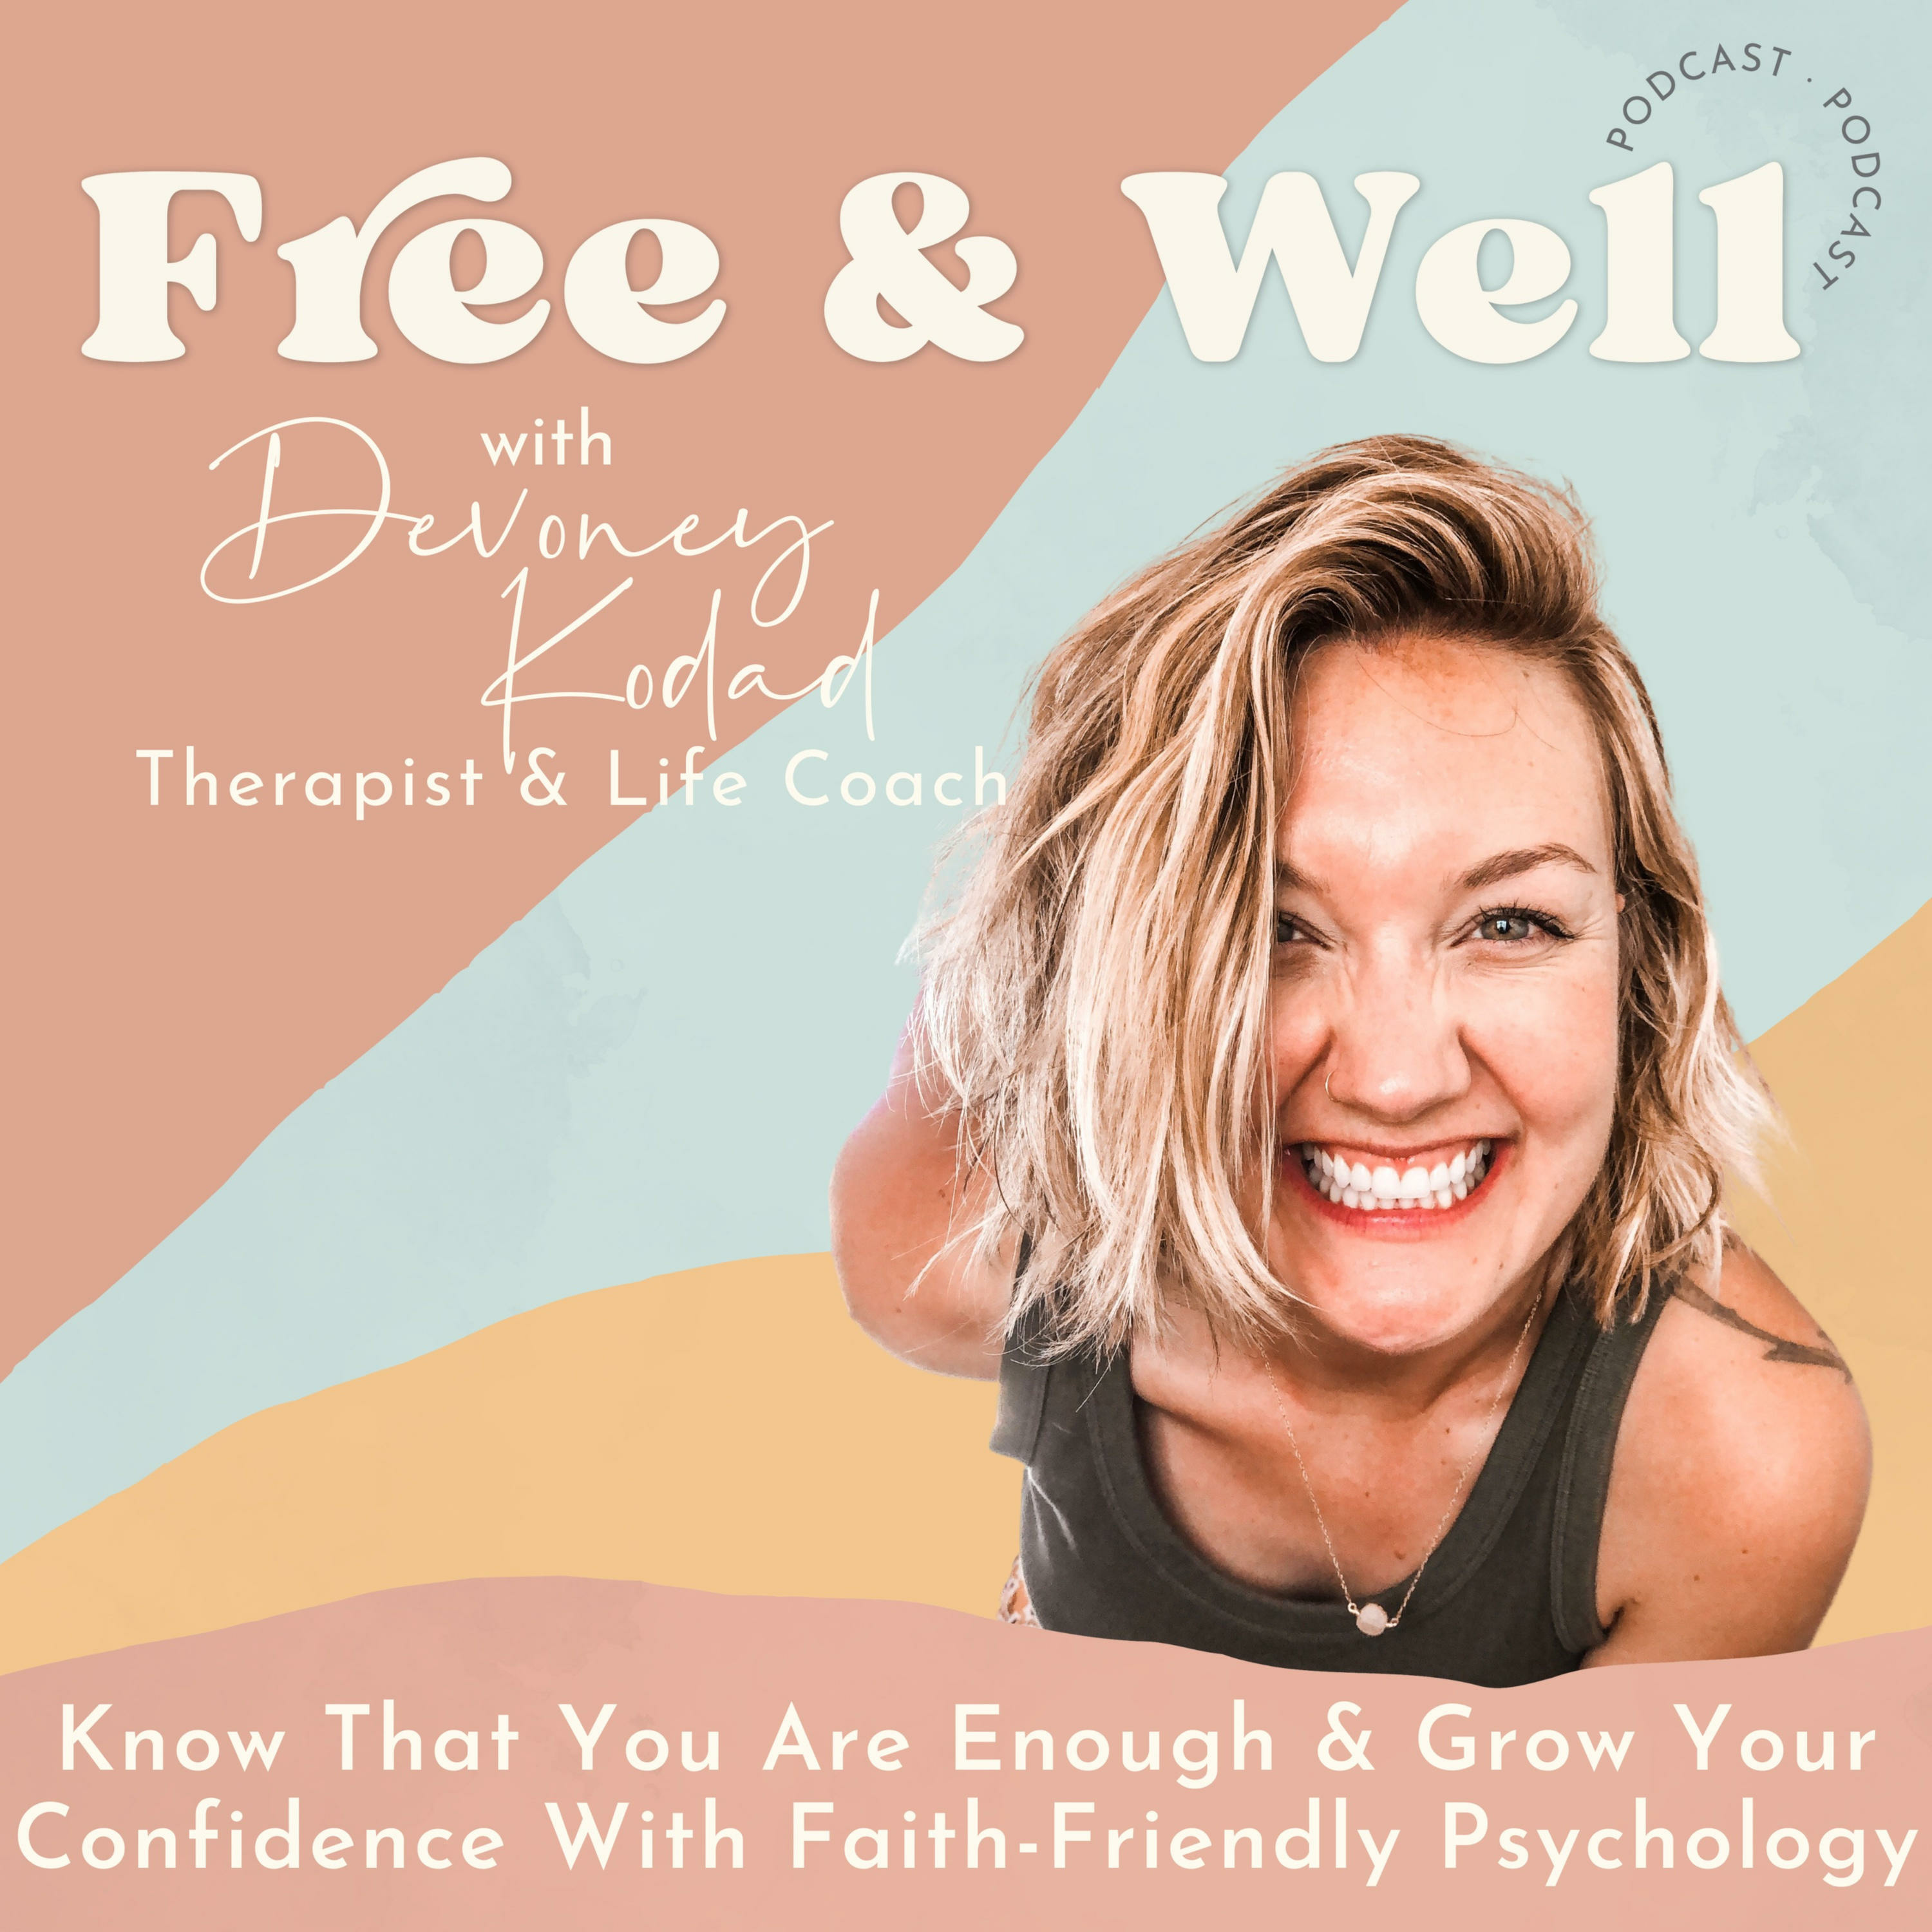 [Wake Up To Your Worth] 10 Minute Faith Friendly Meditation & Positive Affirmations to Start Knowing You Are Enough, Growing Your Self Worth & Making Confident Moves Towards Your Goals & Dreams